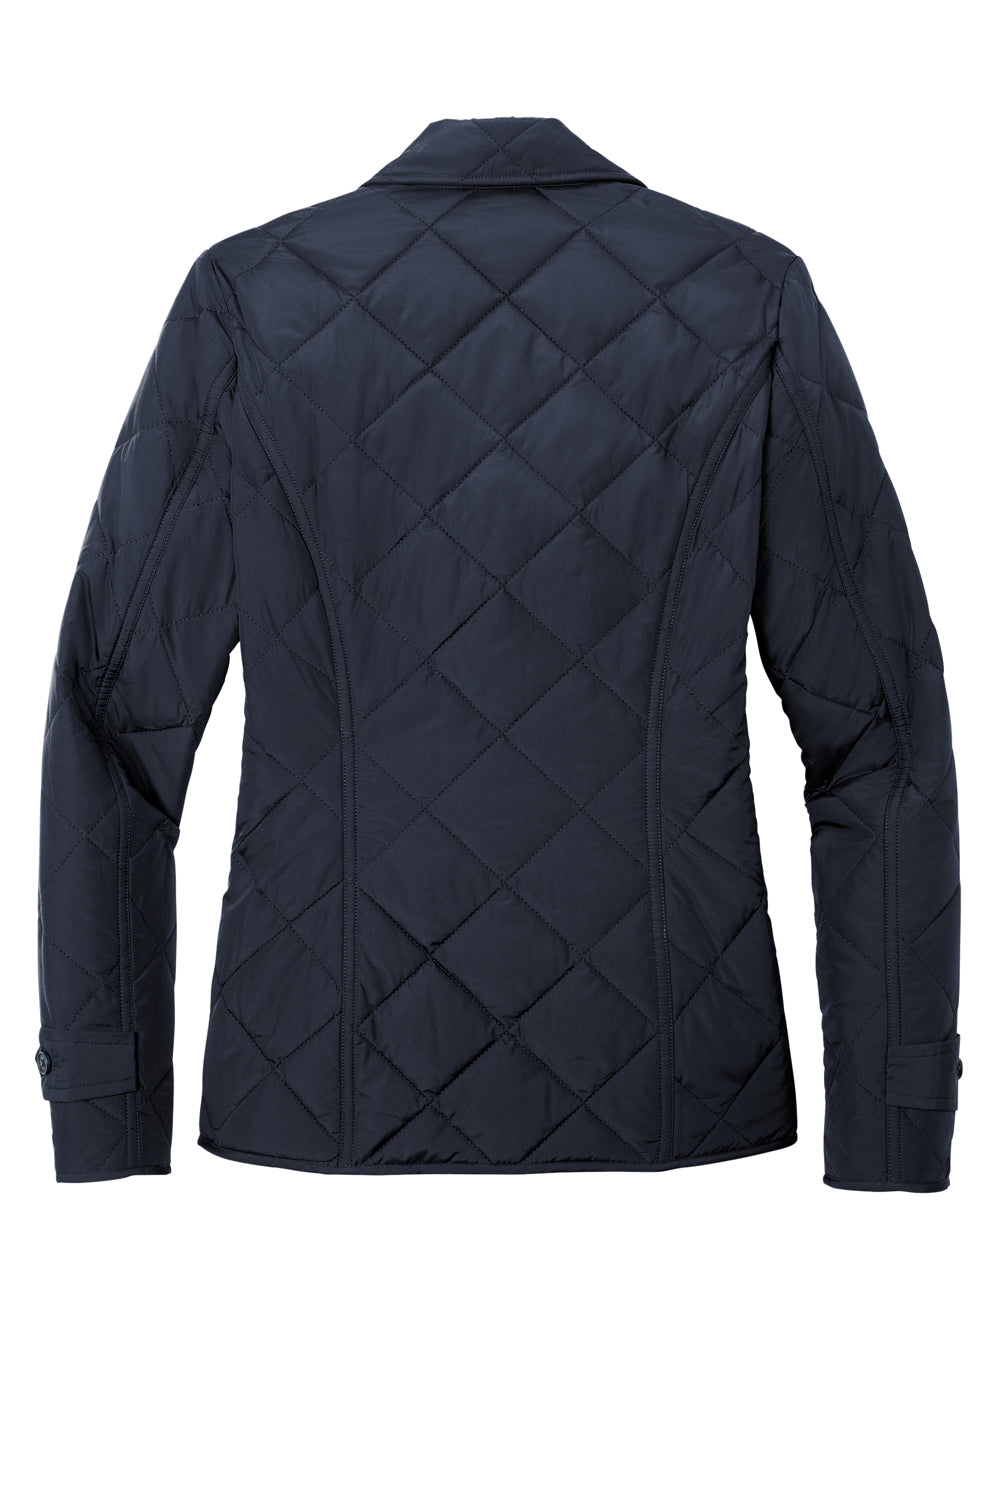 Brooks Brothers Womens Water Resistant Quilted Full Zip Jacket Night Navy Blue Flat Back